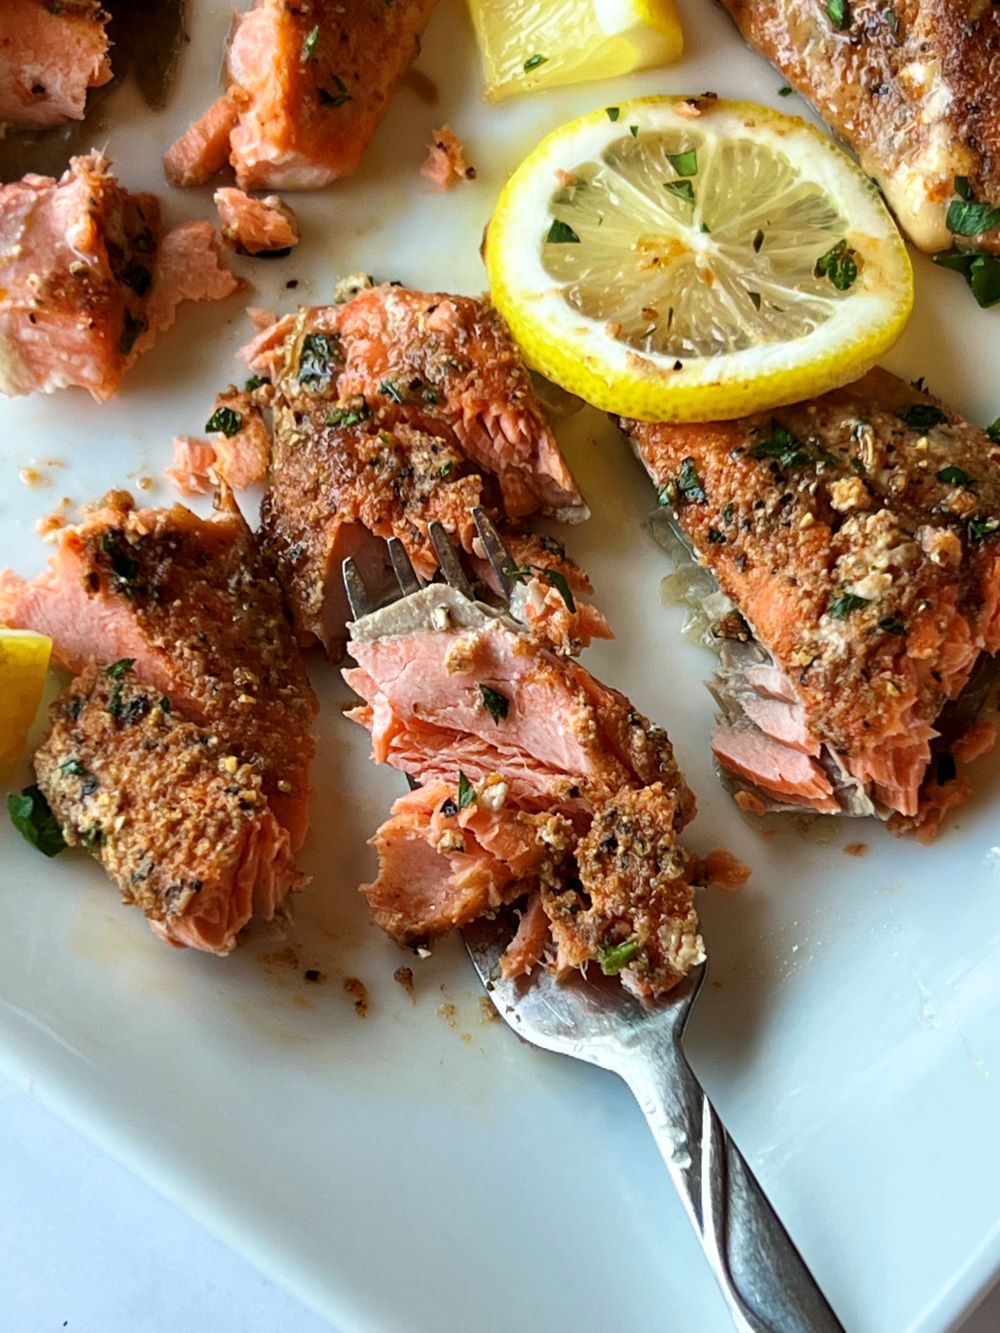 Baked Salmon with Sweet Spiced Rub - The Menu Maid